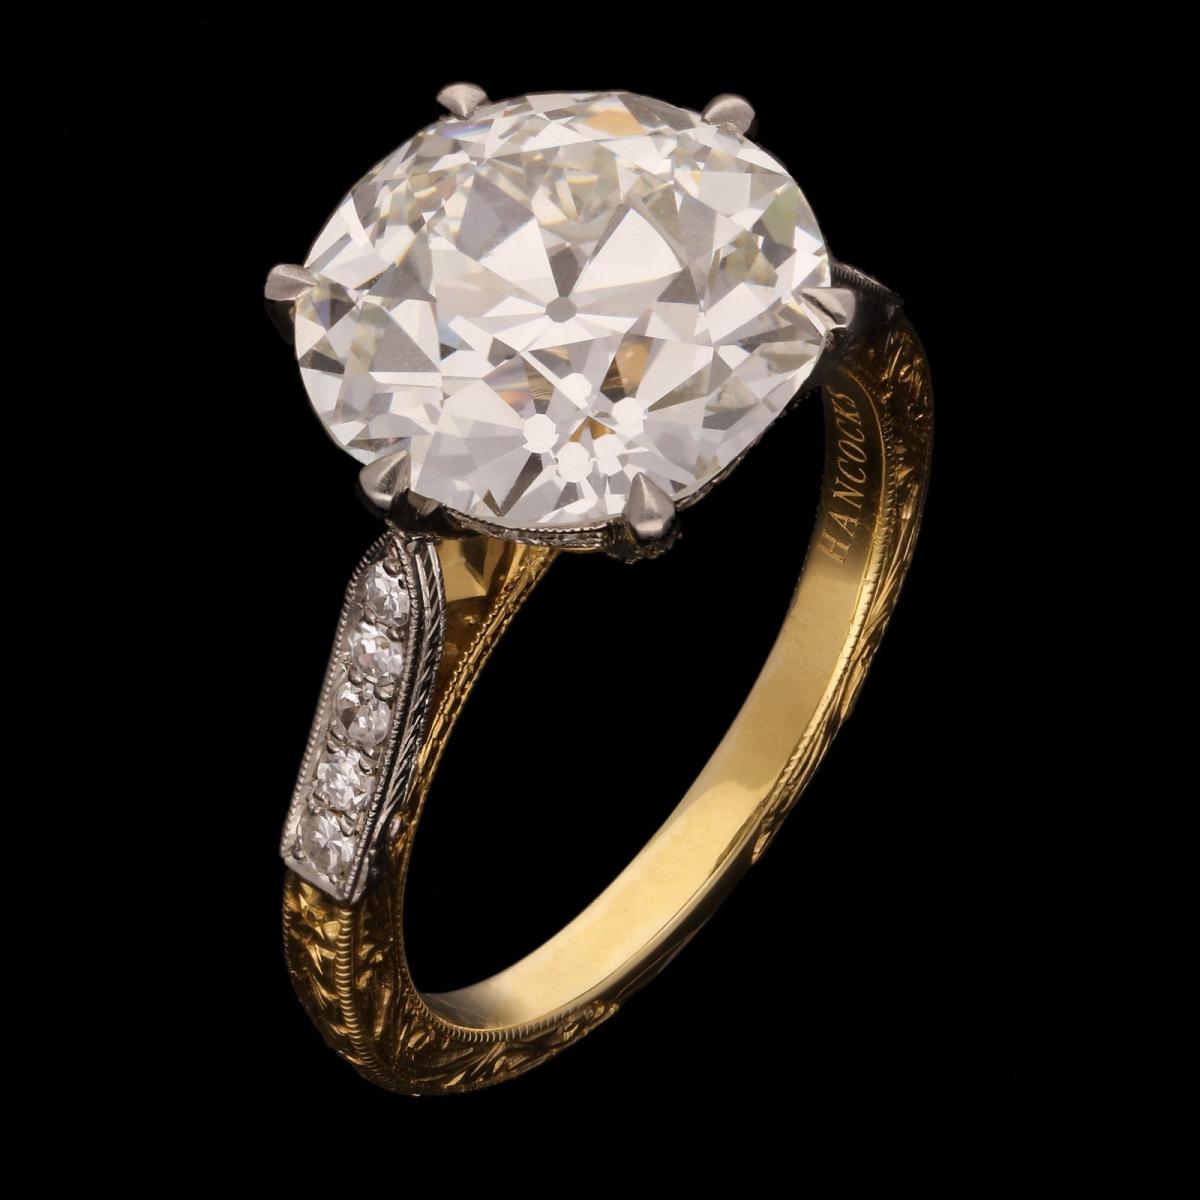 5.95ct old European brilliant cut diamond solitaire ring with diamond-set band.